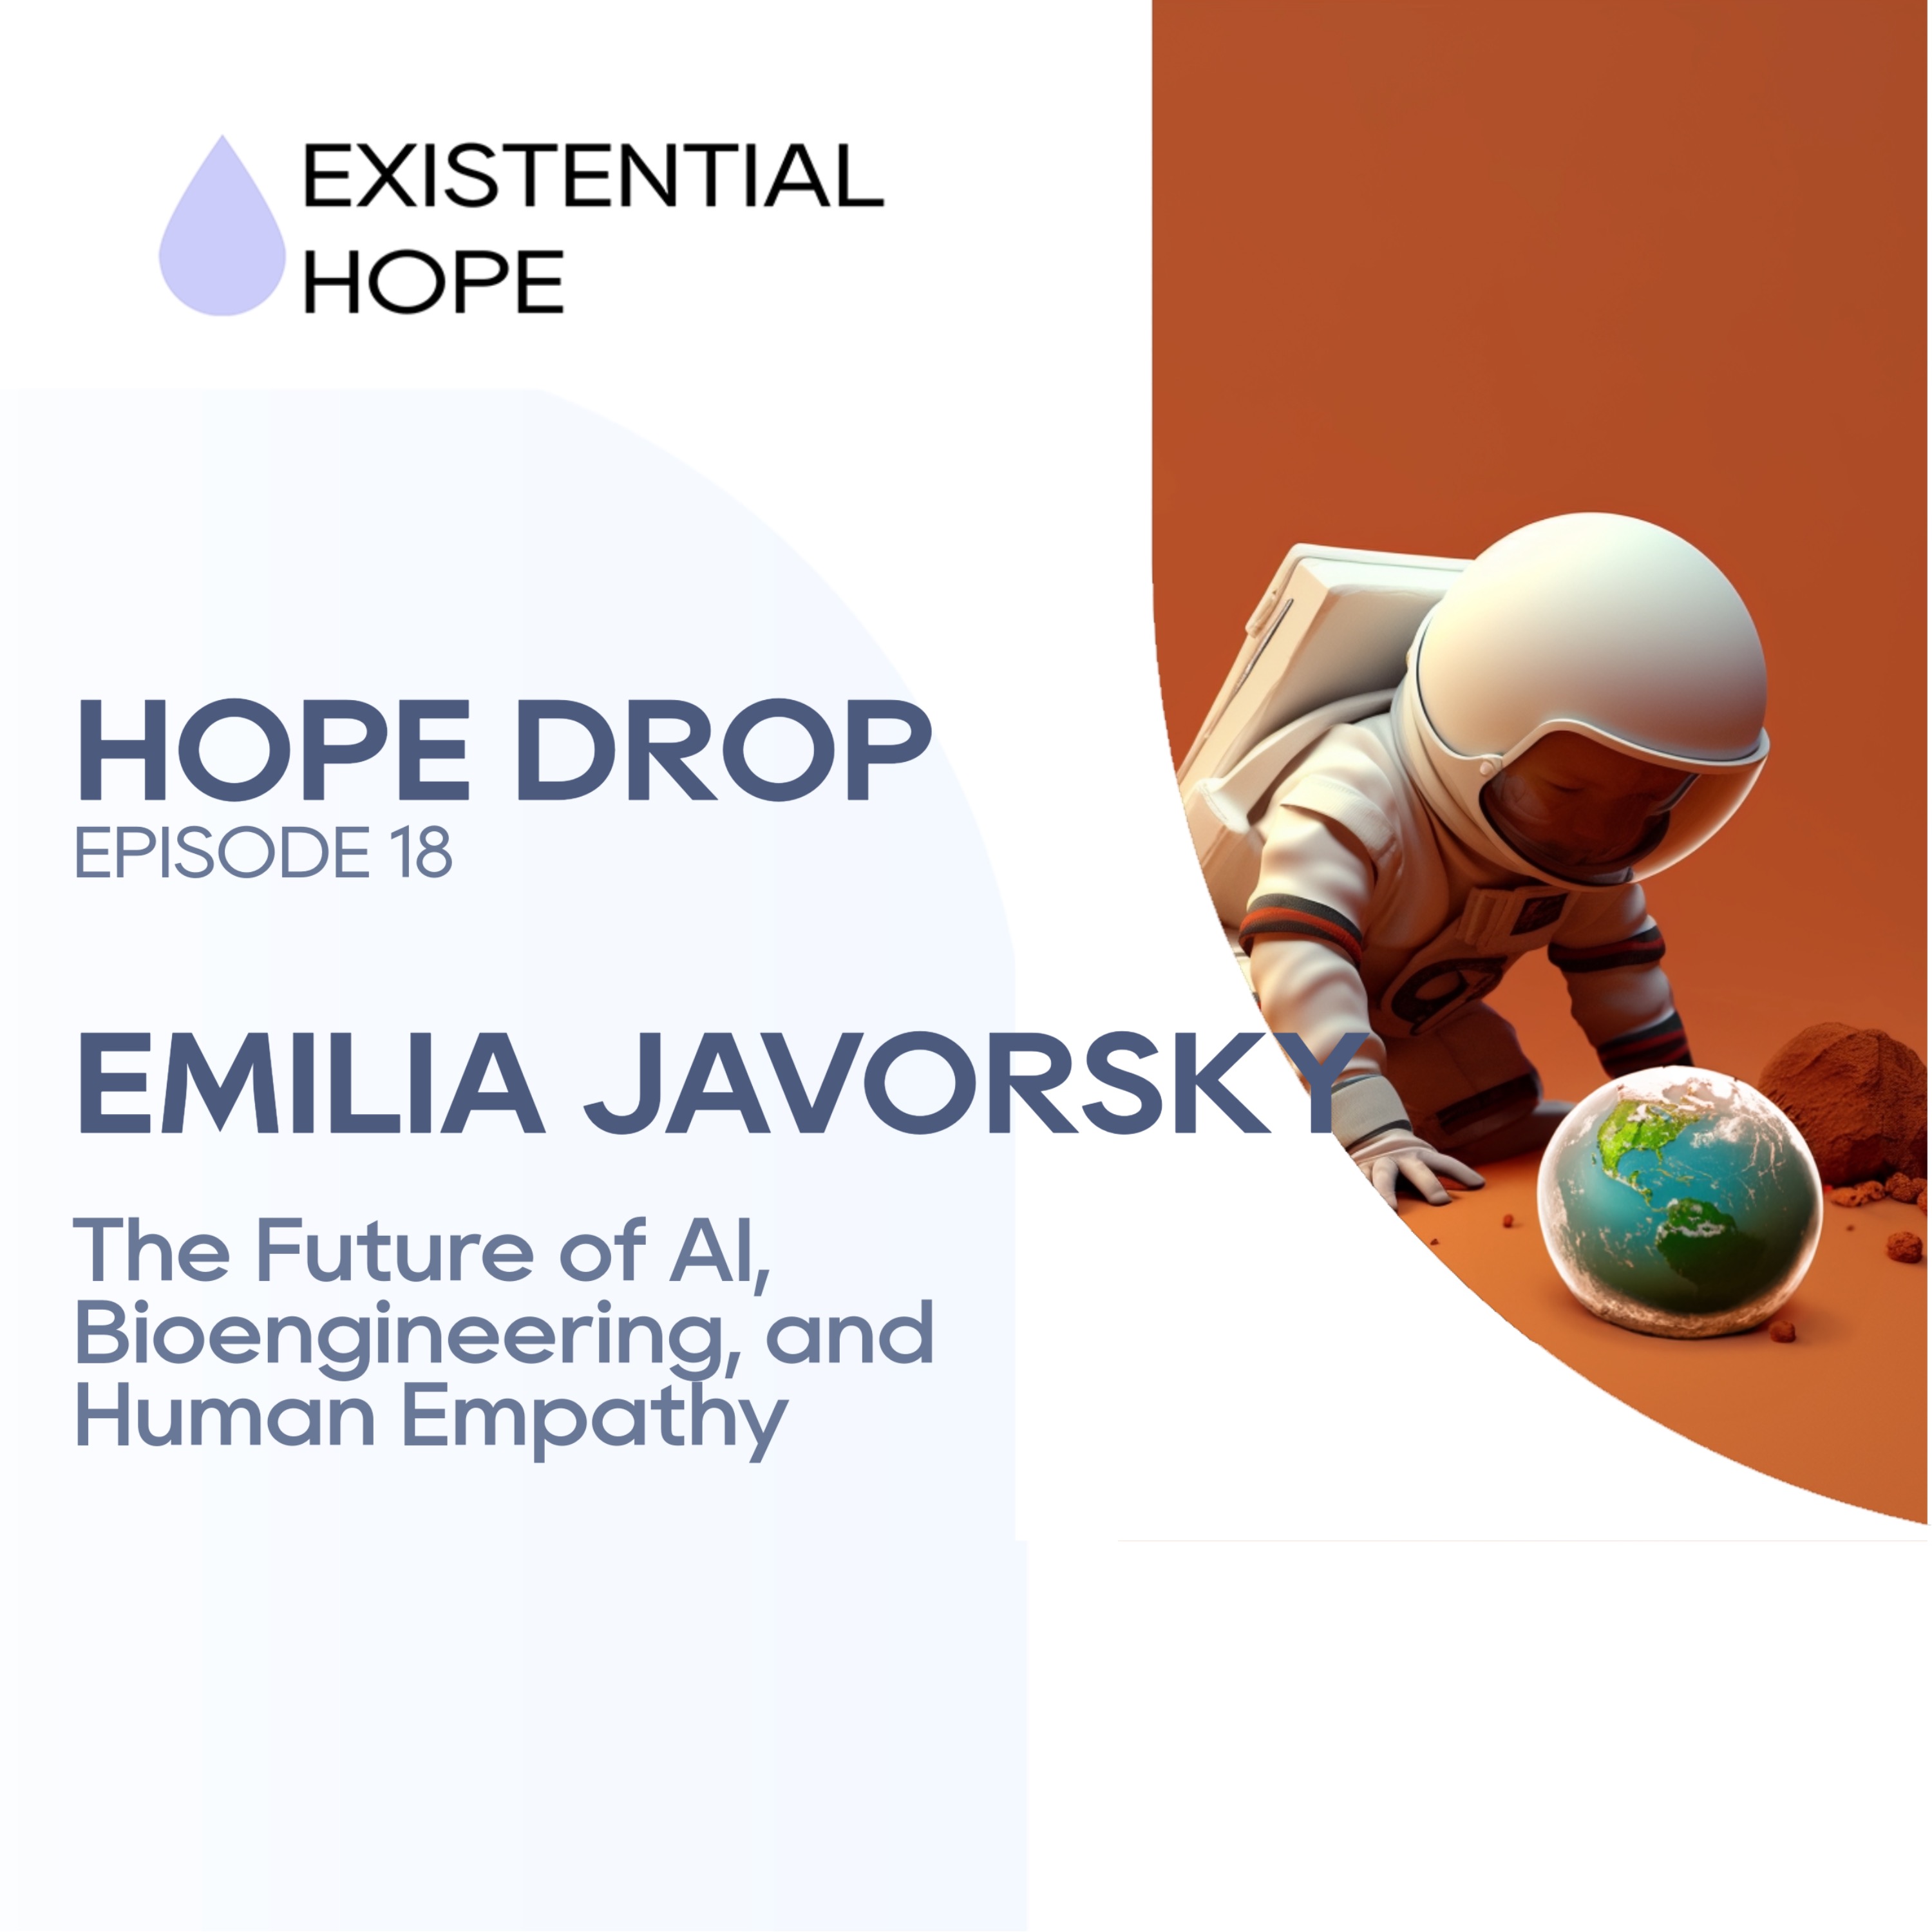 Existential Hope Podcast: Emilia Javorsky | The Future of AI, Bioengineering, and Human Empathy